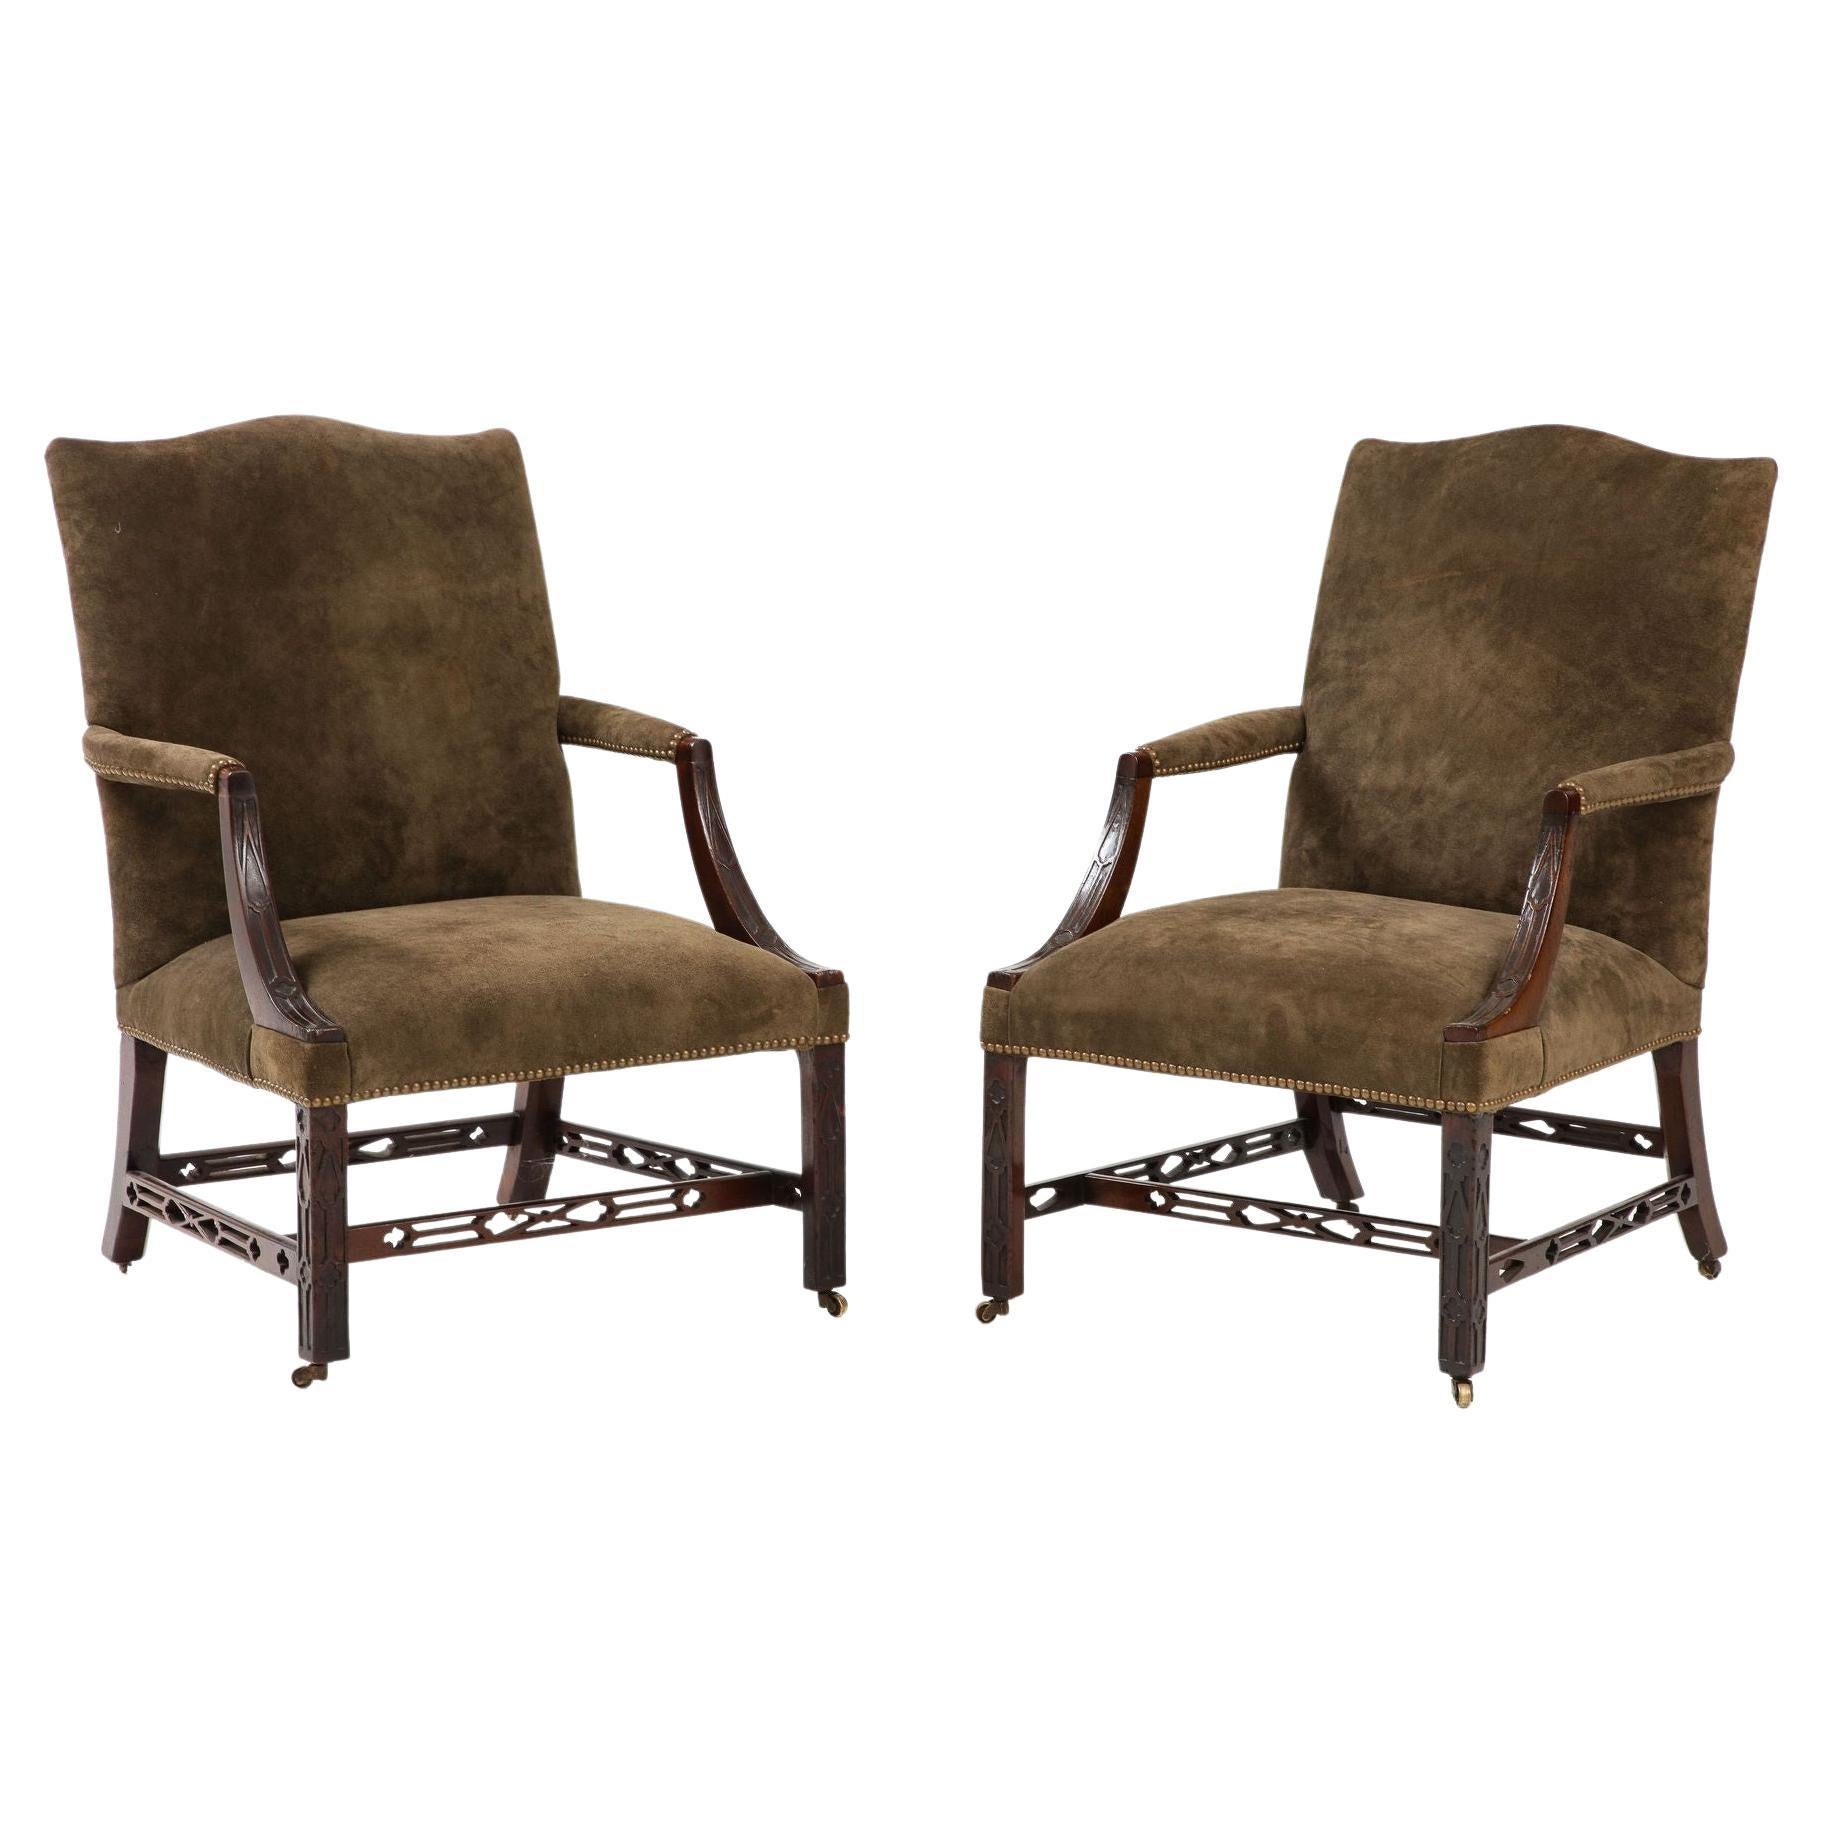 Matched Pair of George III Gainsborough Chairs